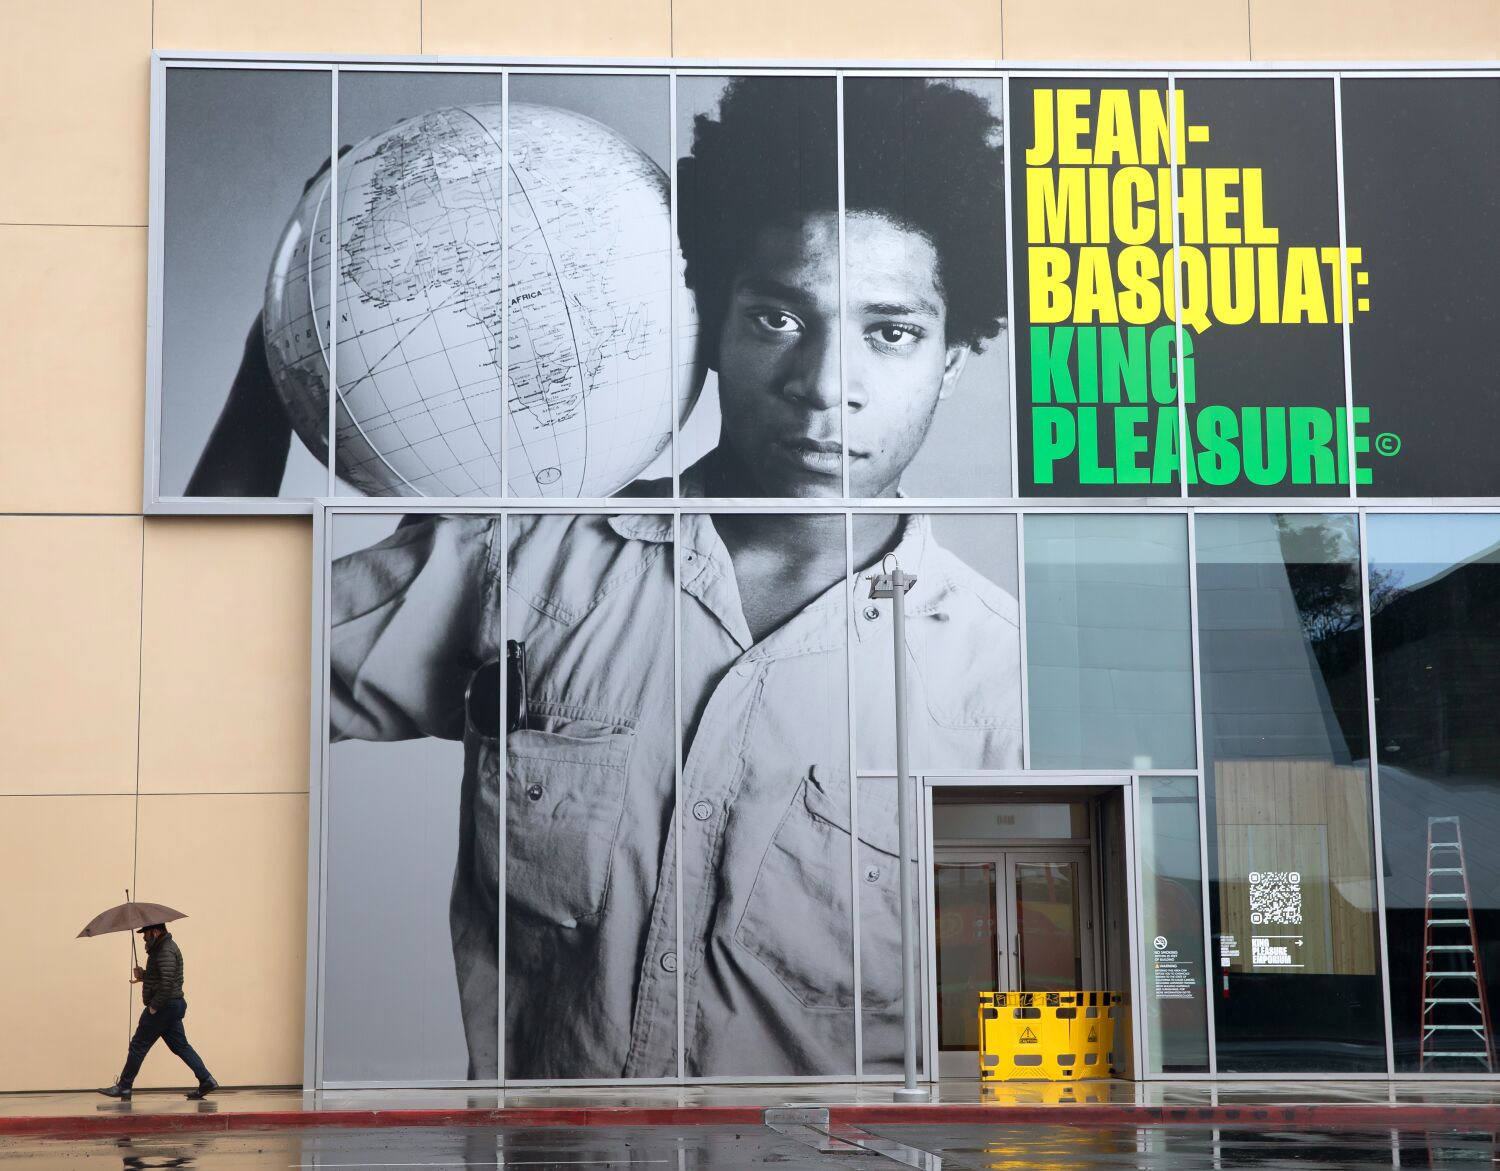 A trove of Basquiat's little-seen work arrives in L.A. — a city pivotal to his artistic life